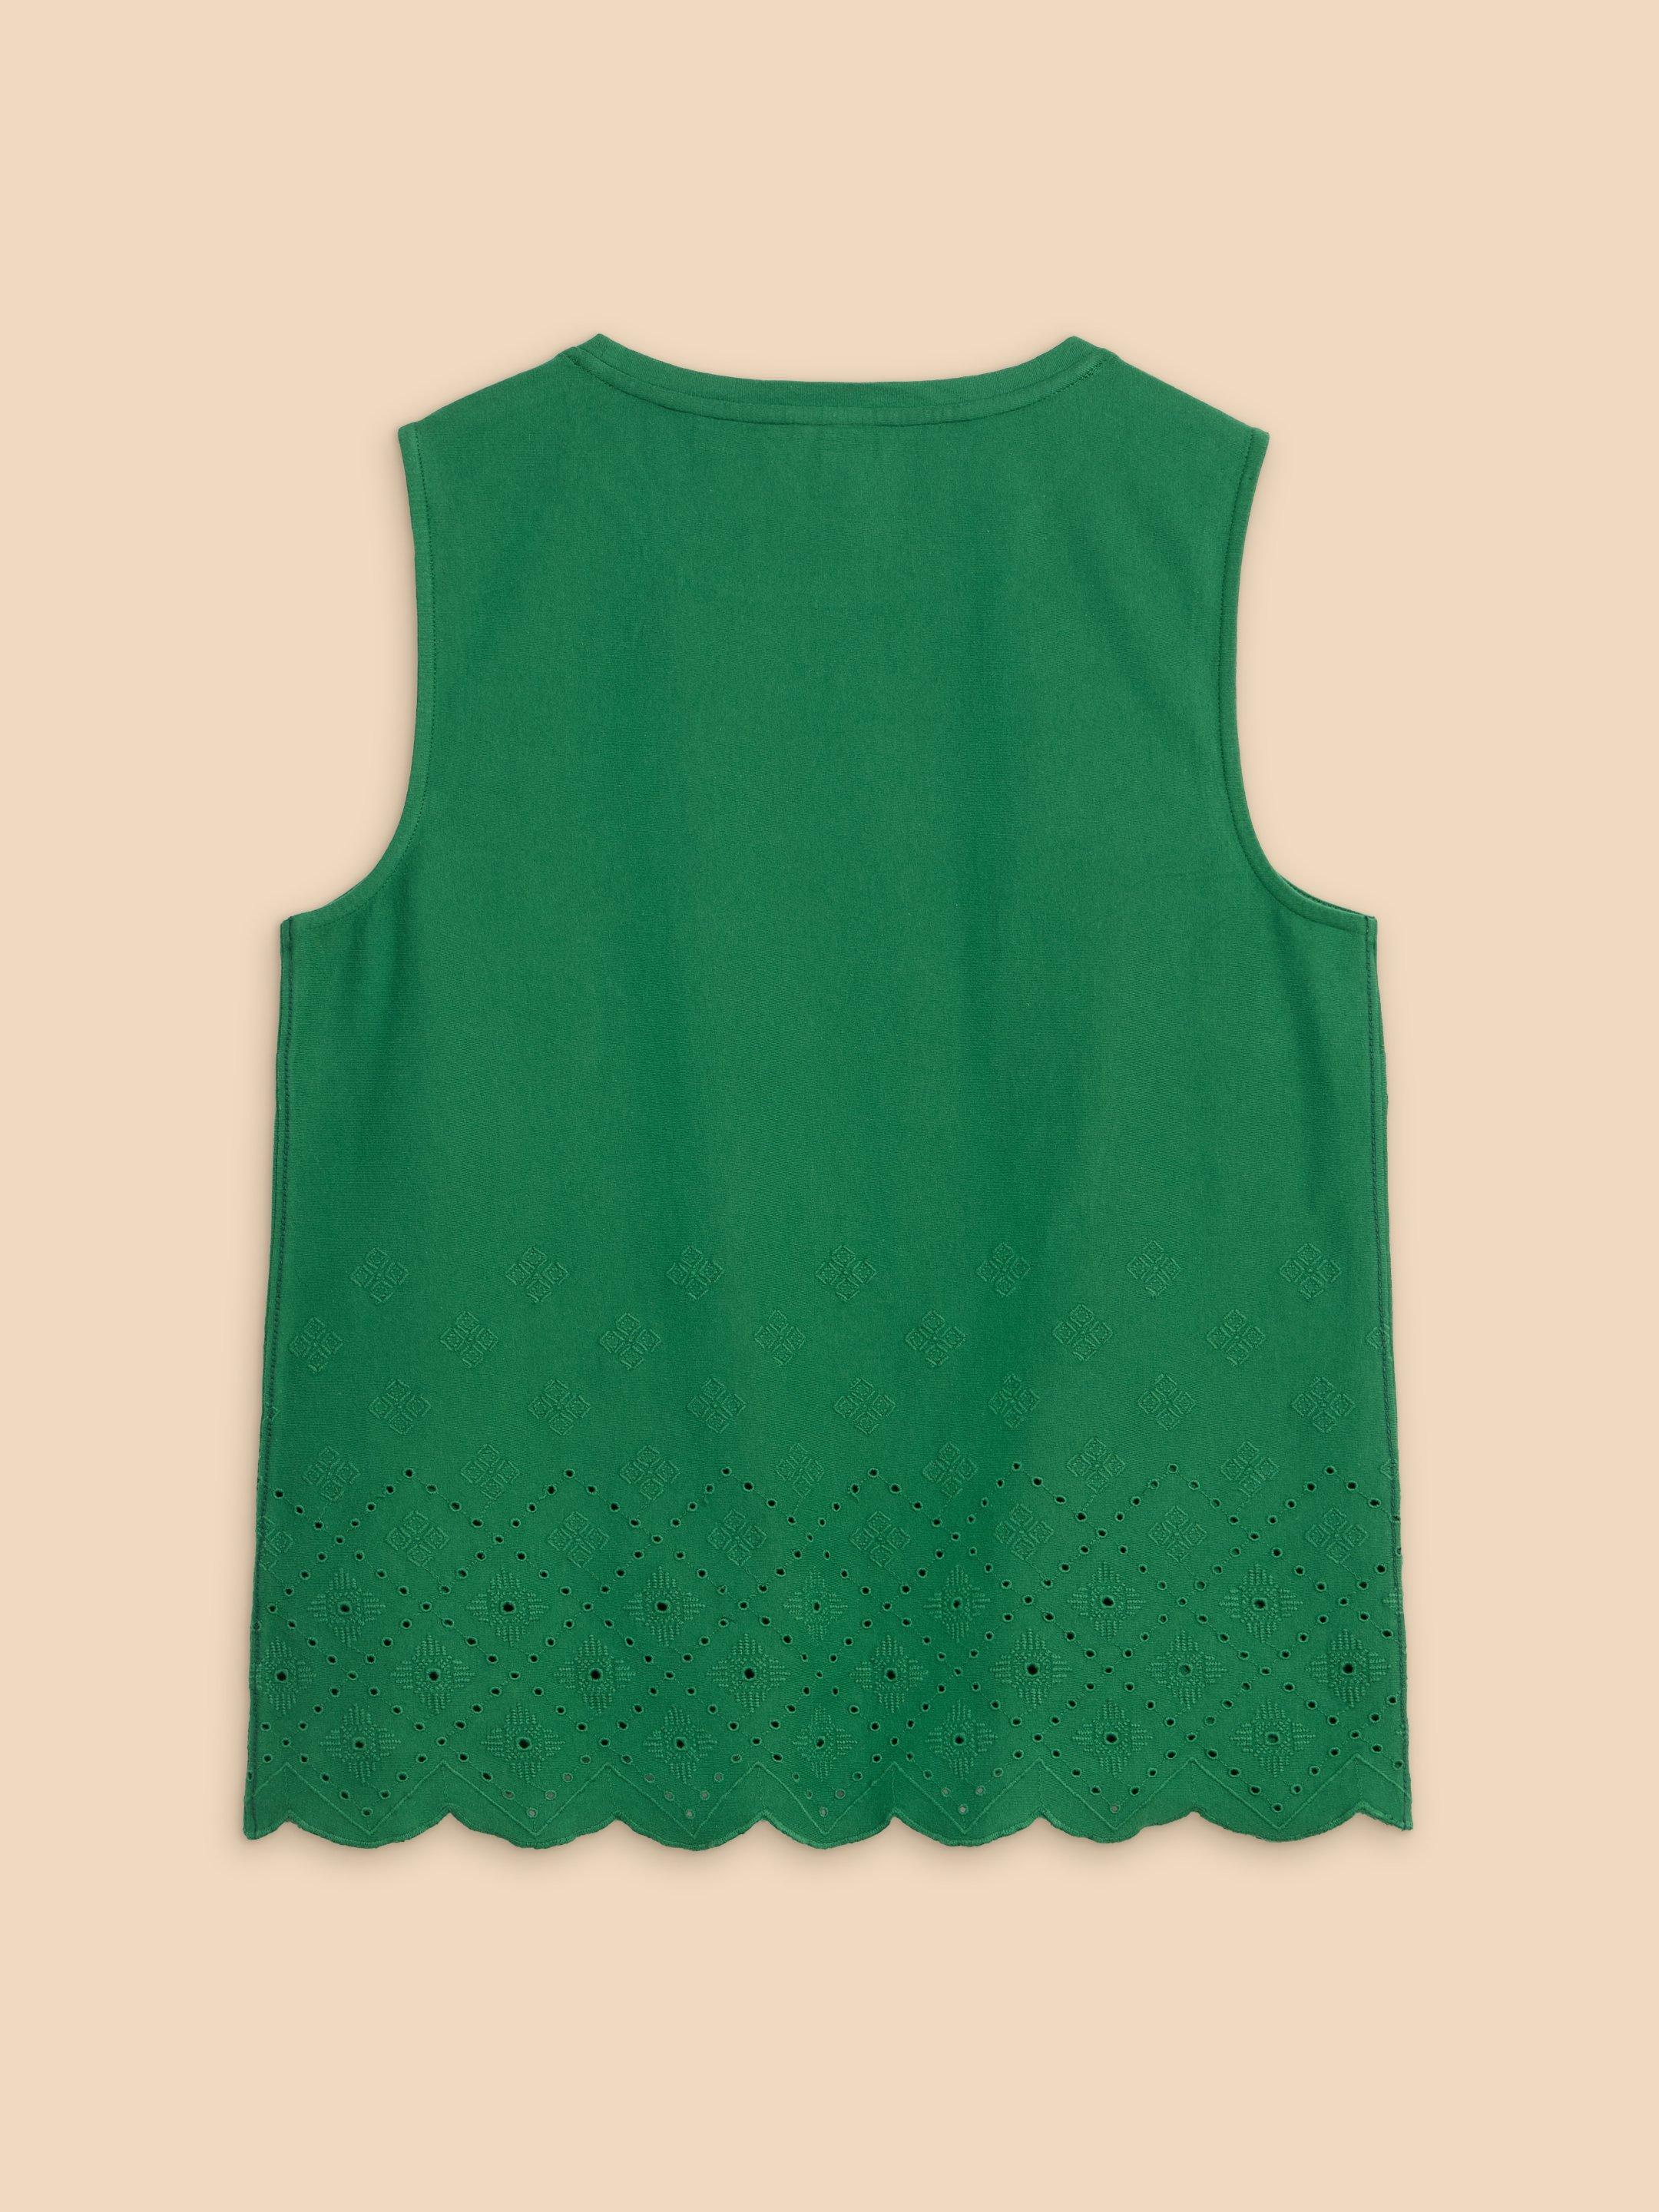 SILVIA CUT OUT VEST in BRT GREEN - FLAT BACK